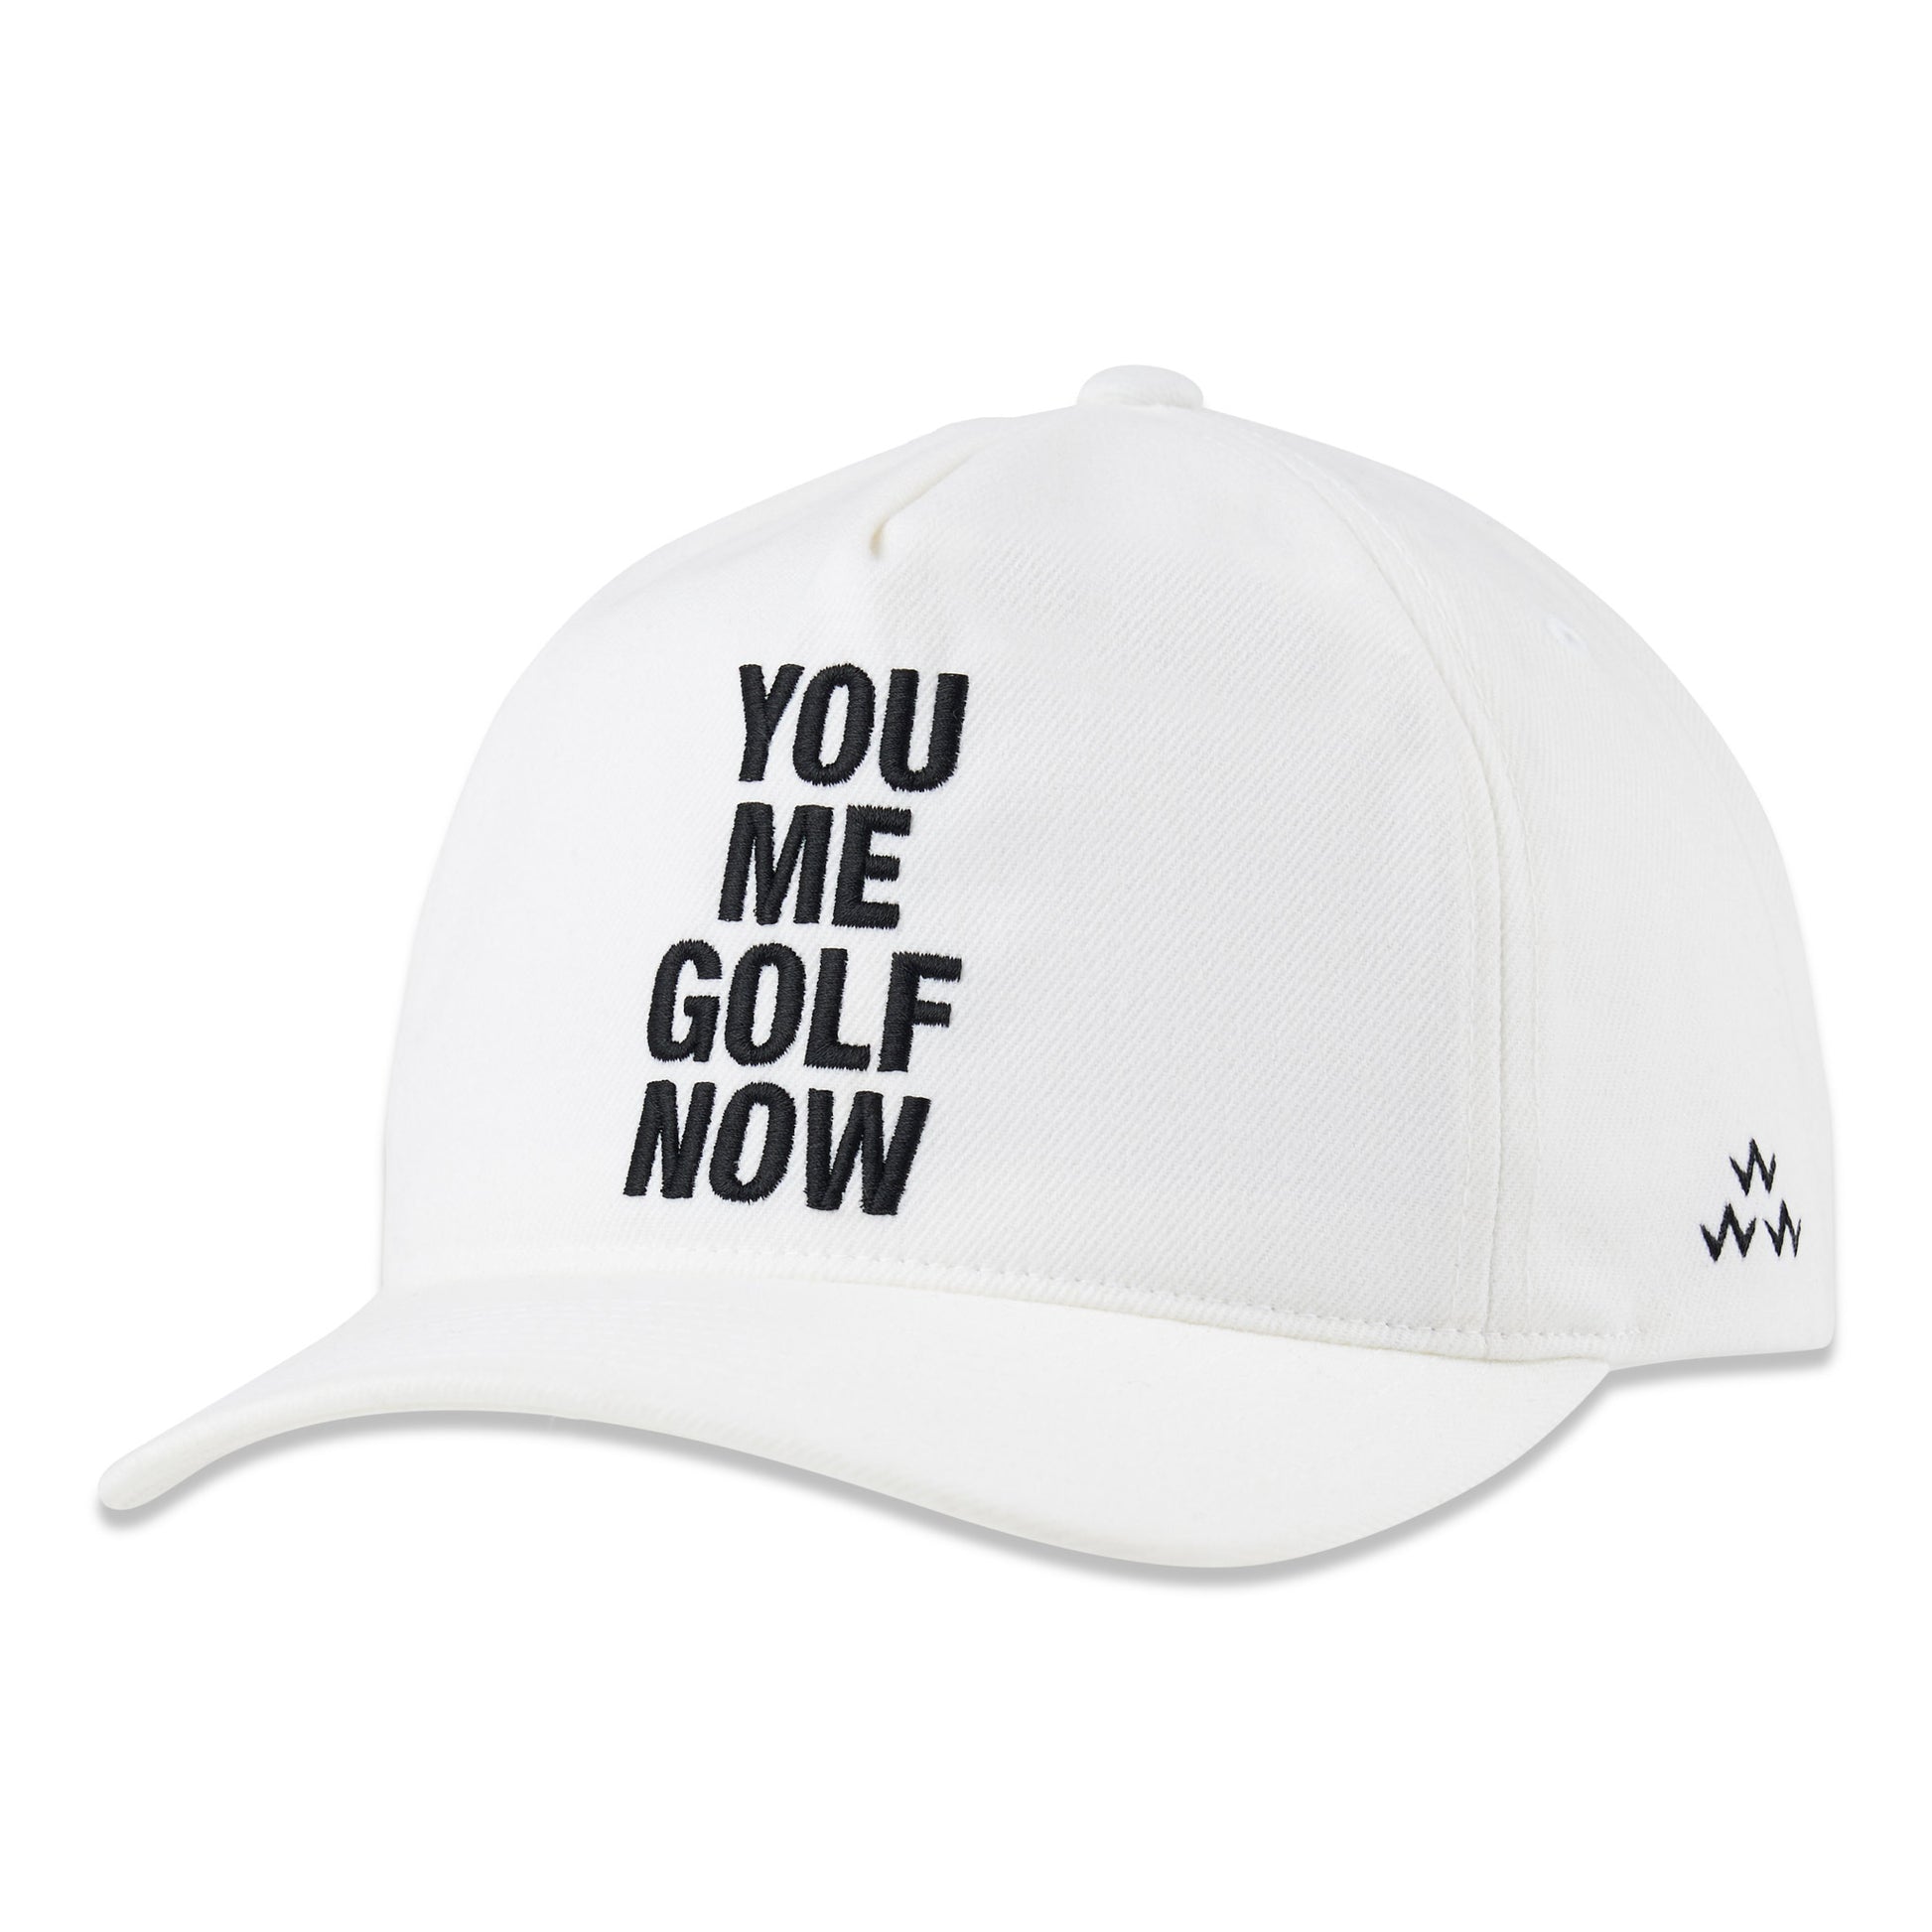 birds-of-condor-white-you-me-golf-now-snapback-hat-front